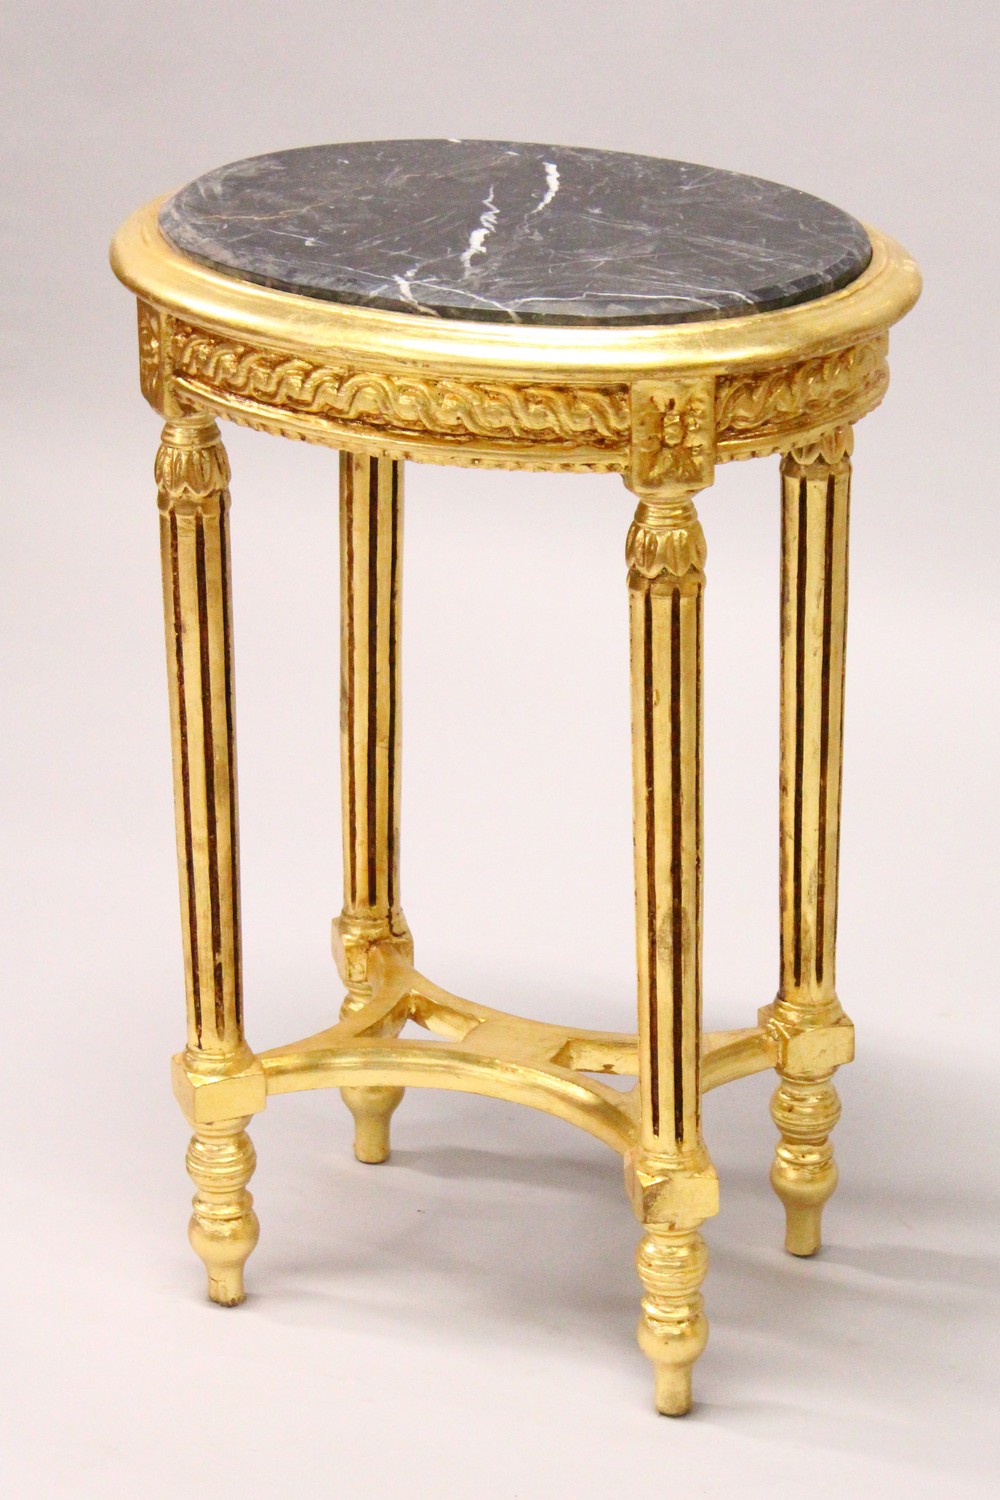 A FRENCH STYLE GILTWOOD OVAL TABLE, inset with a black marble top. 50cms wide x 72cms high.